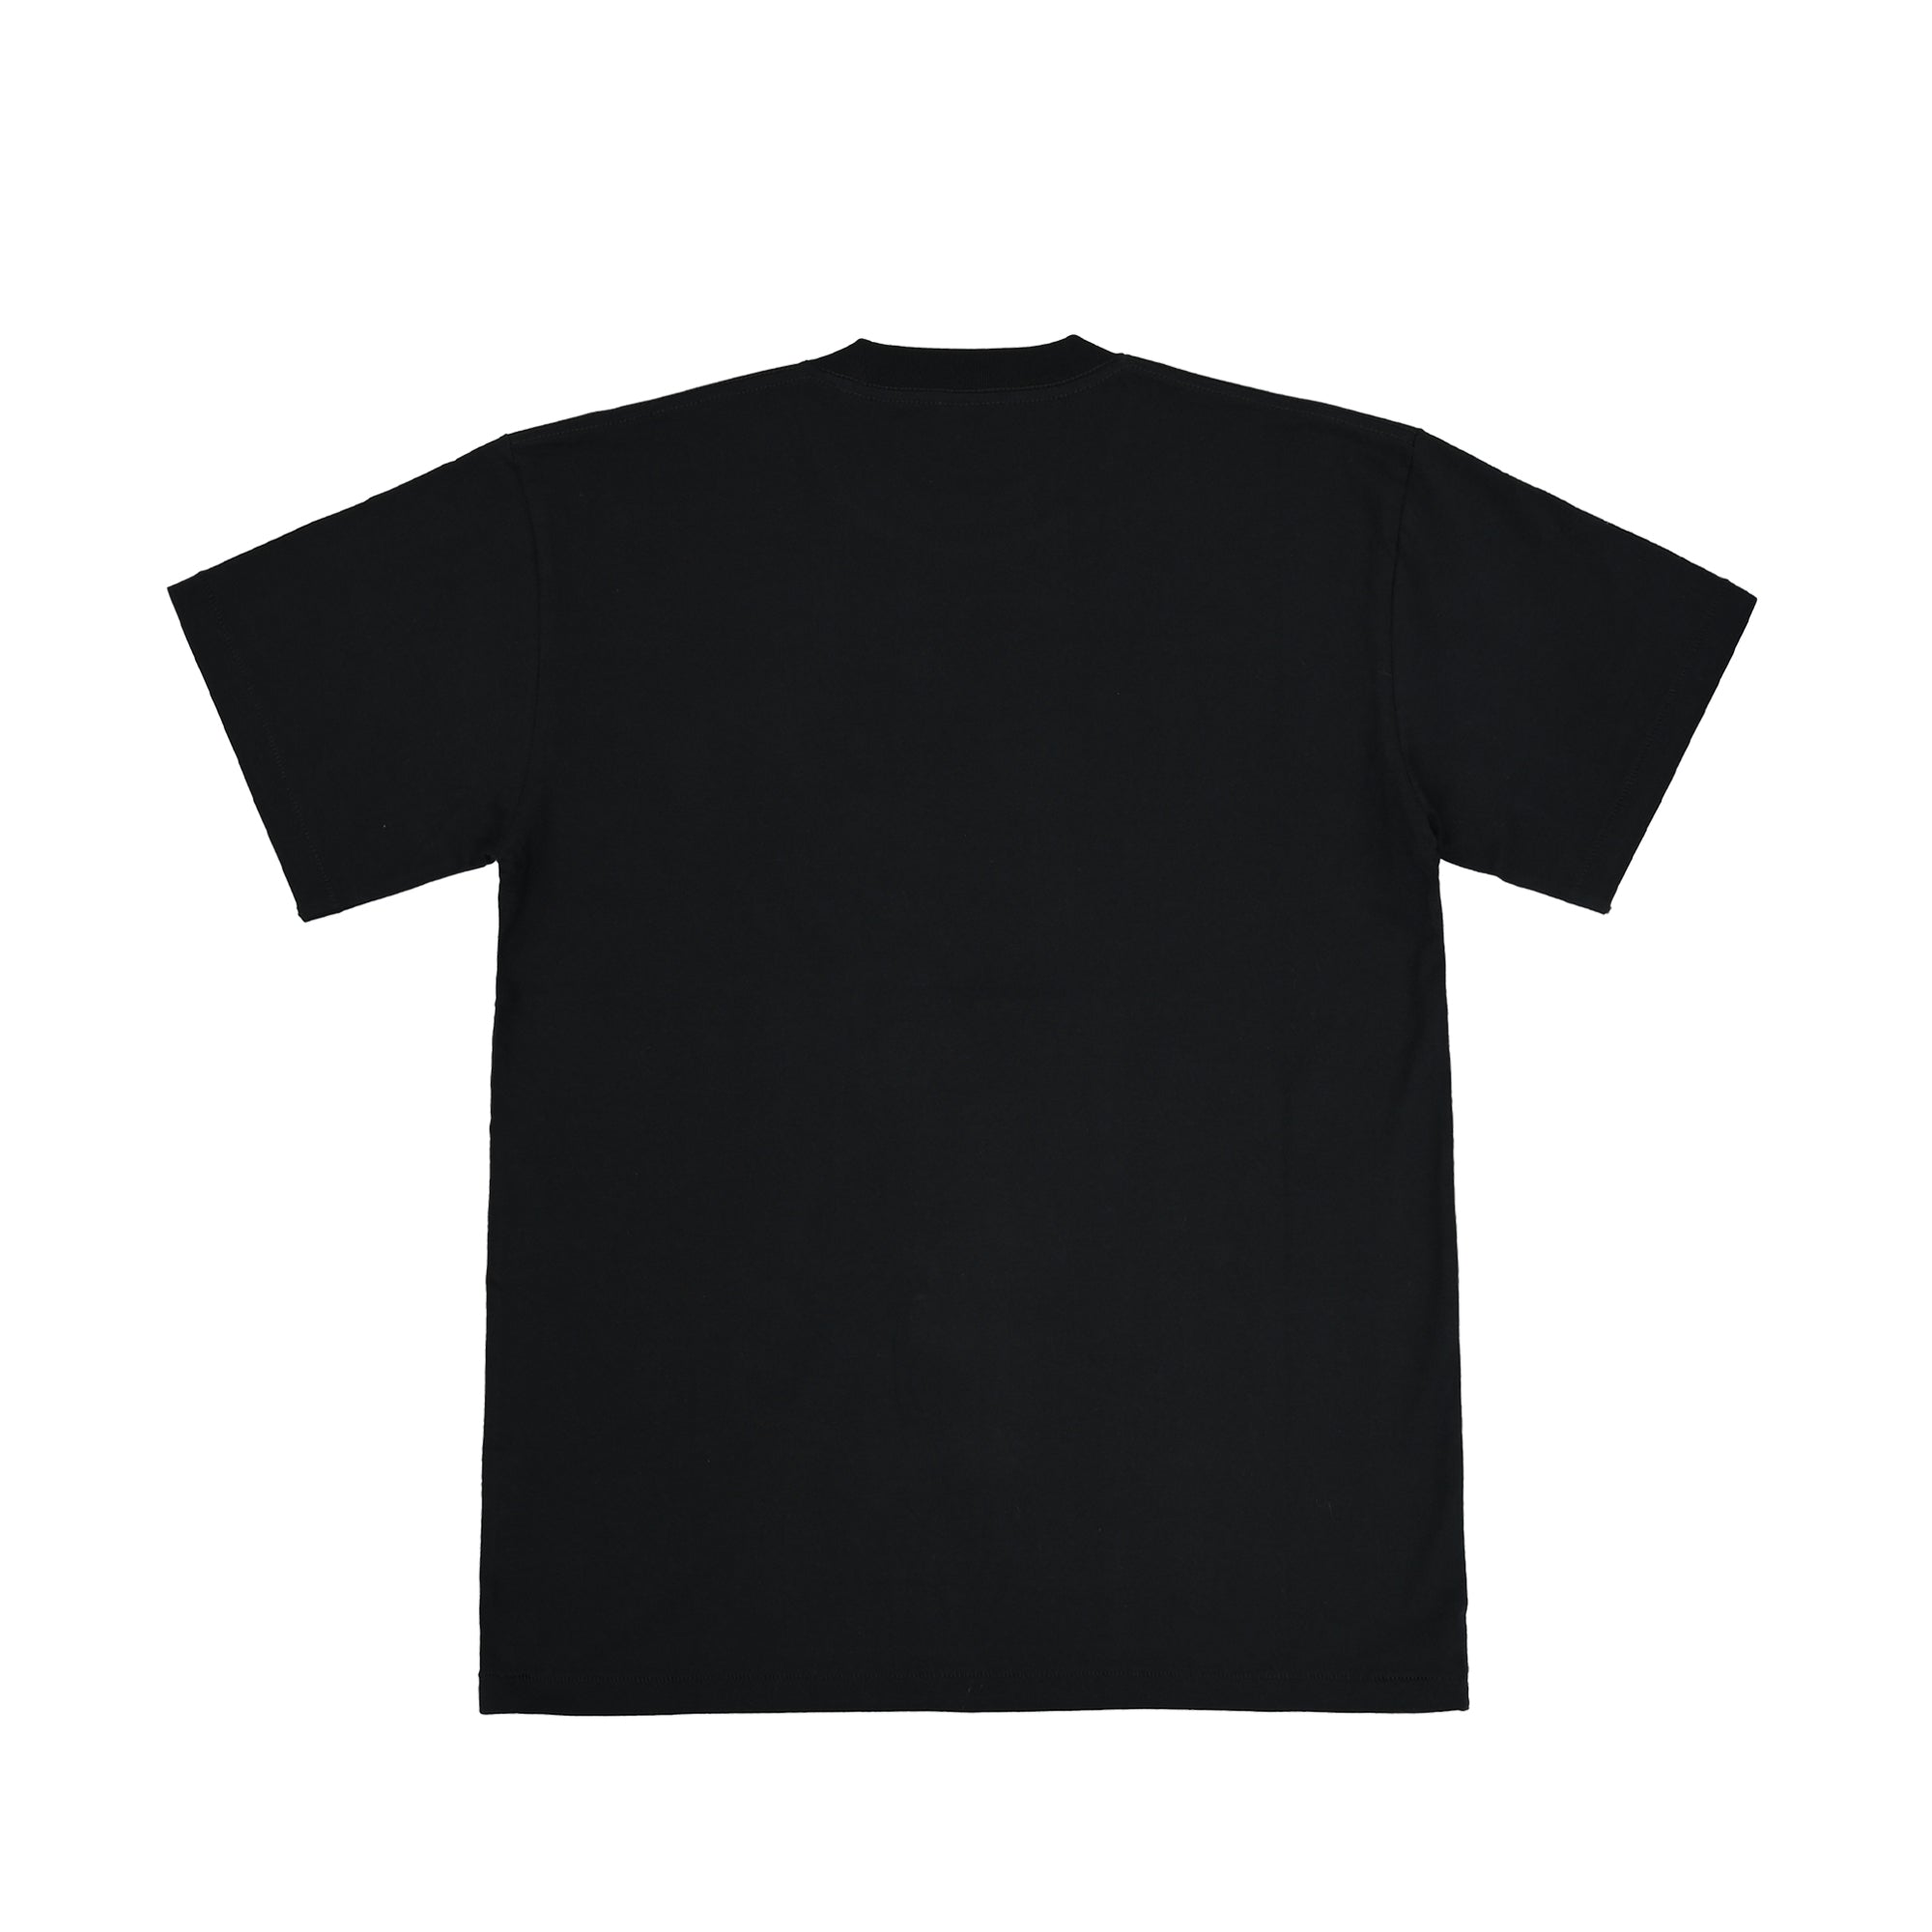 The Salvages 'Sublime' Dance Dad T-Shirt in Black